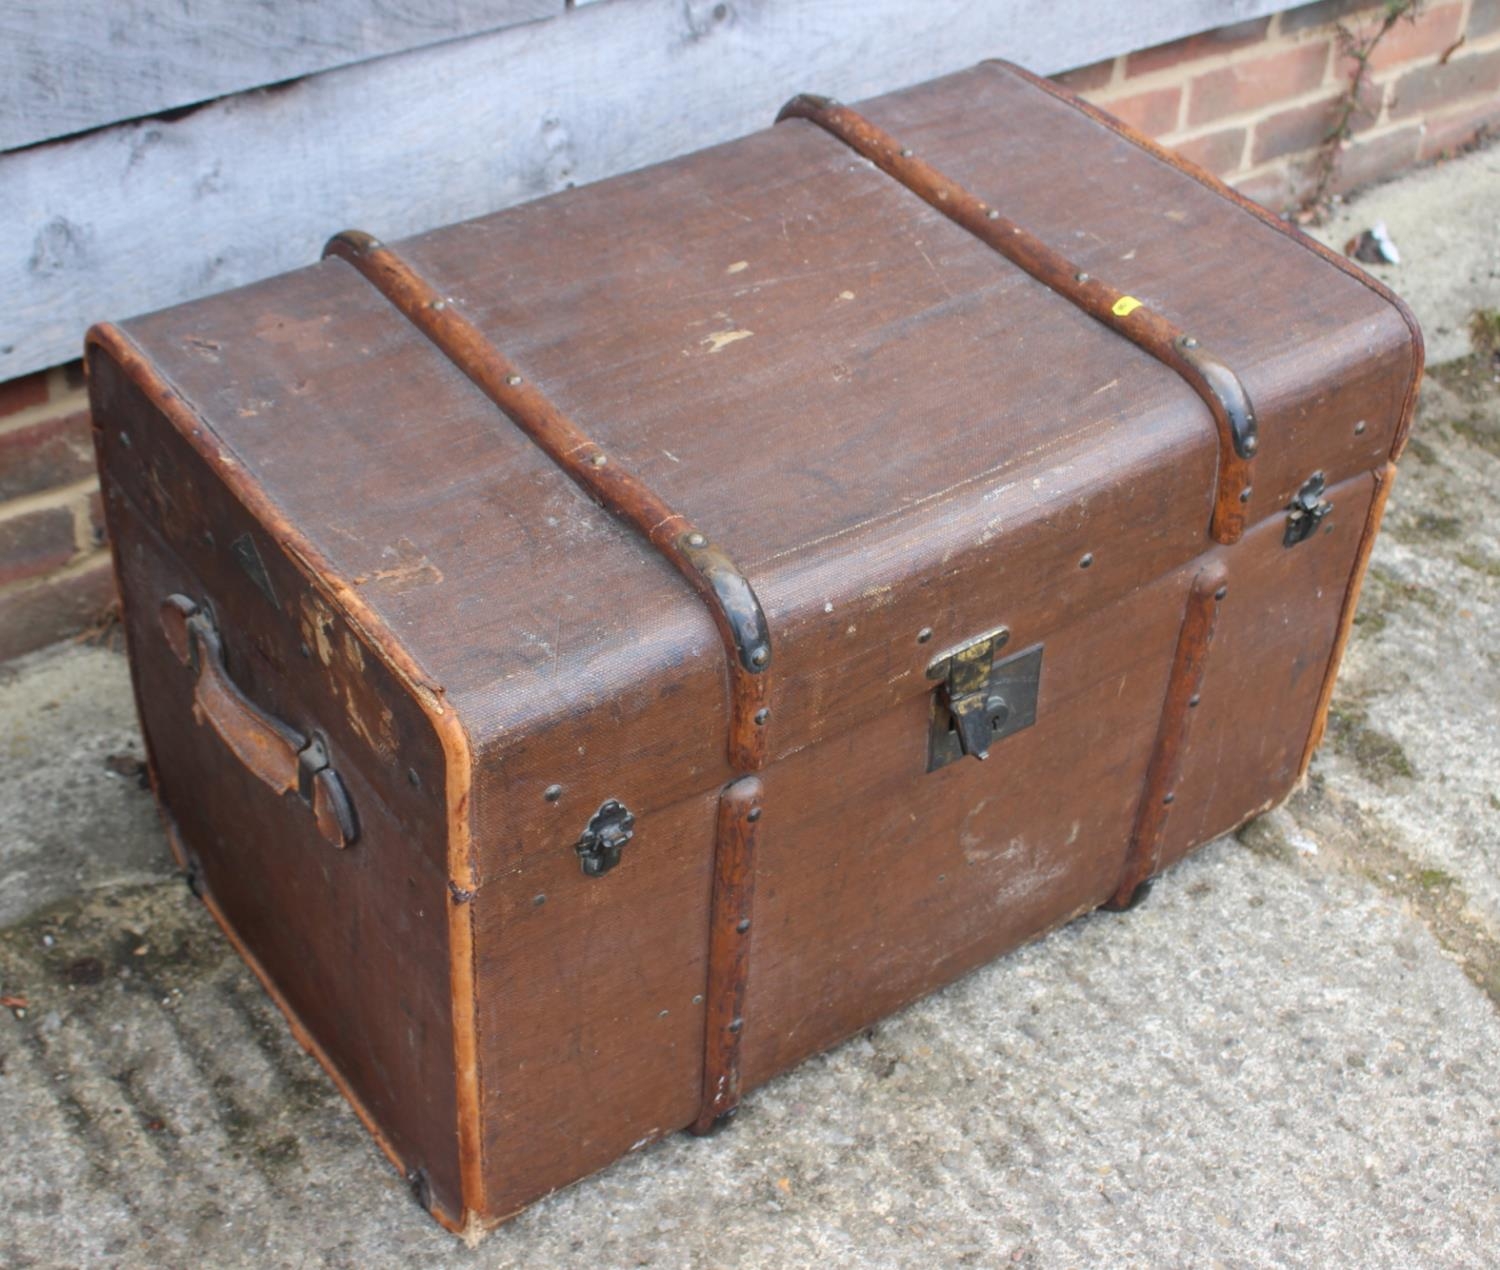 A late 19th century canvas and maple bound travel trunk with fitted interior and lift-out tray